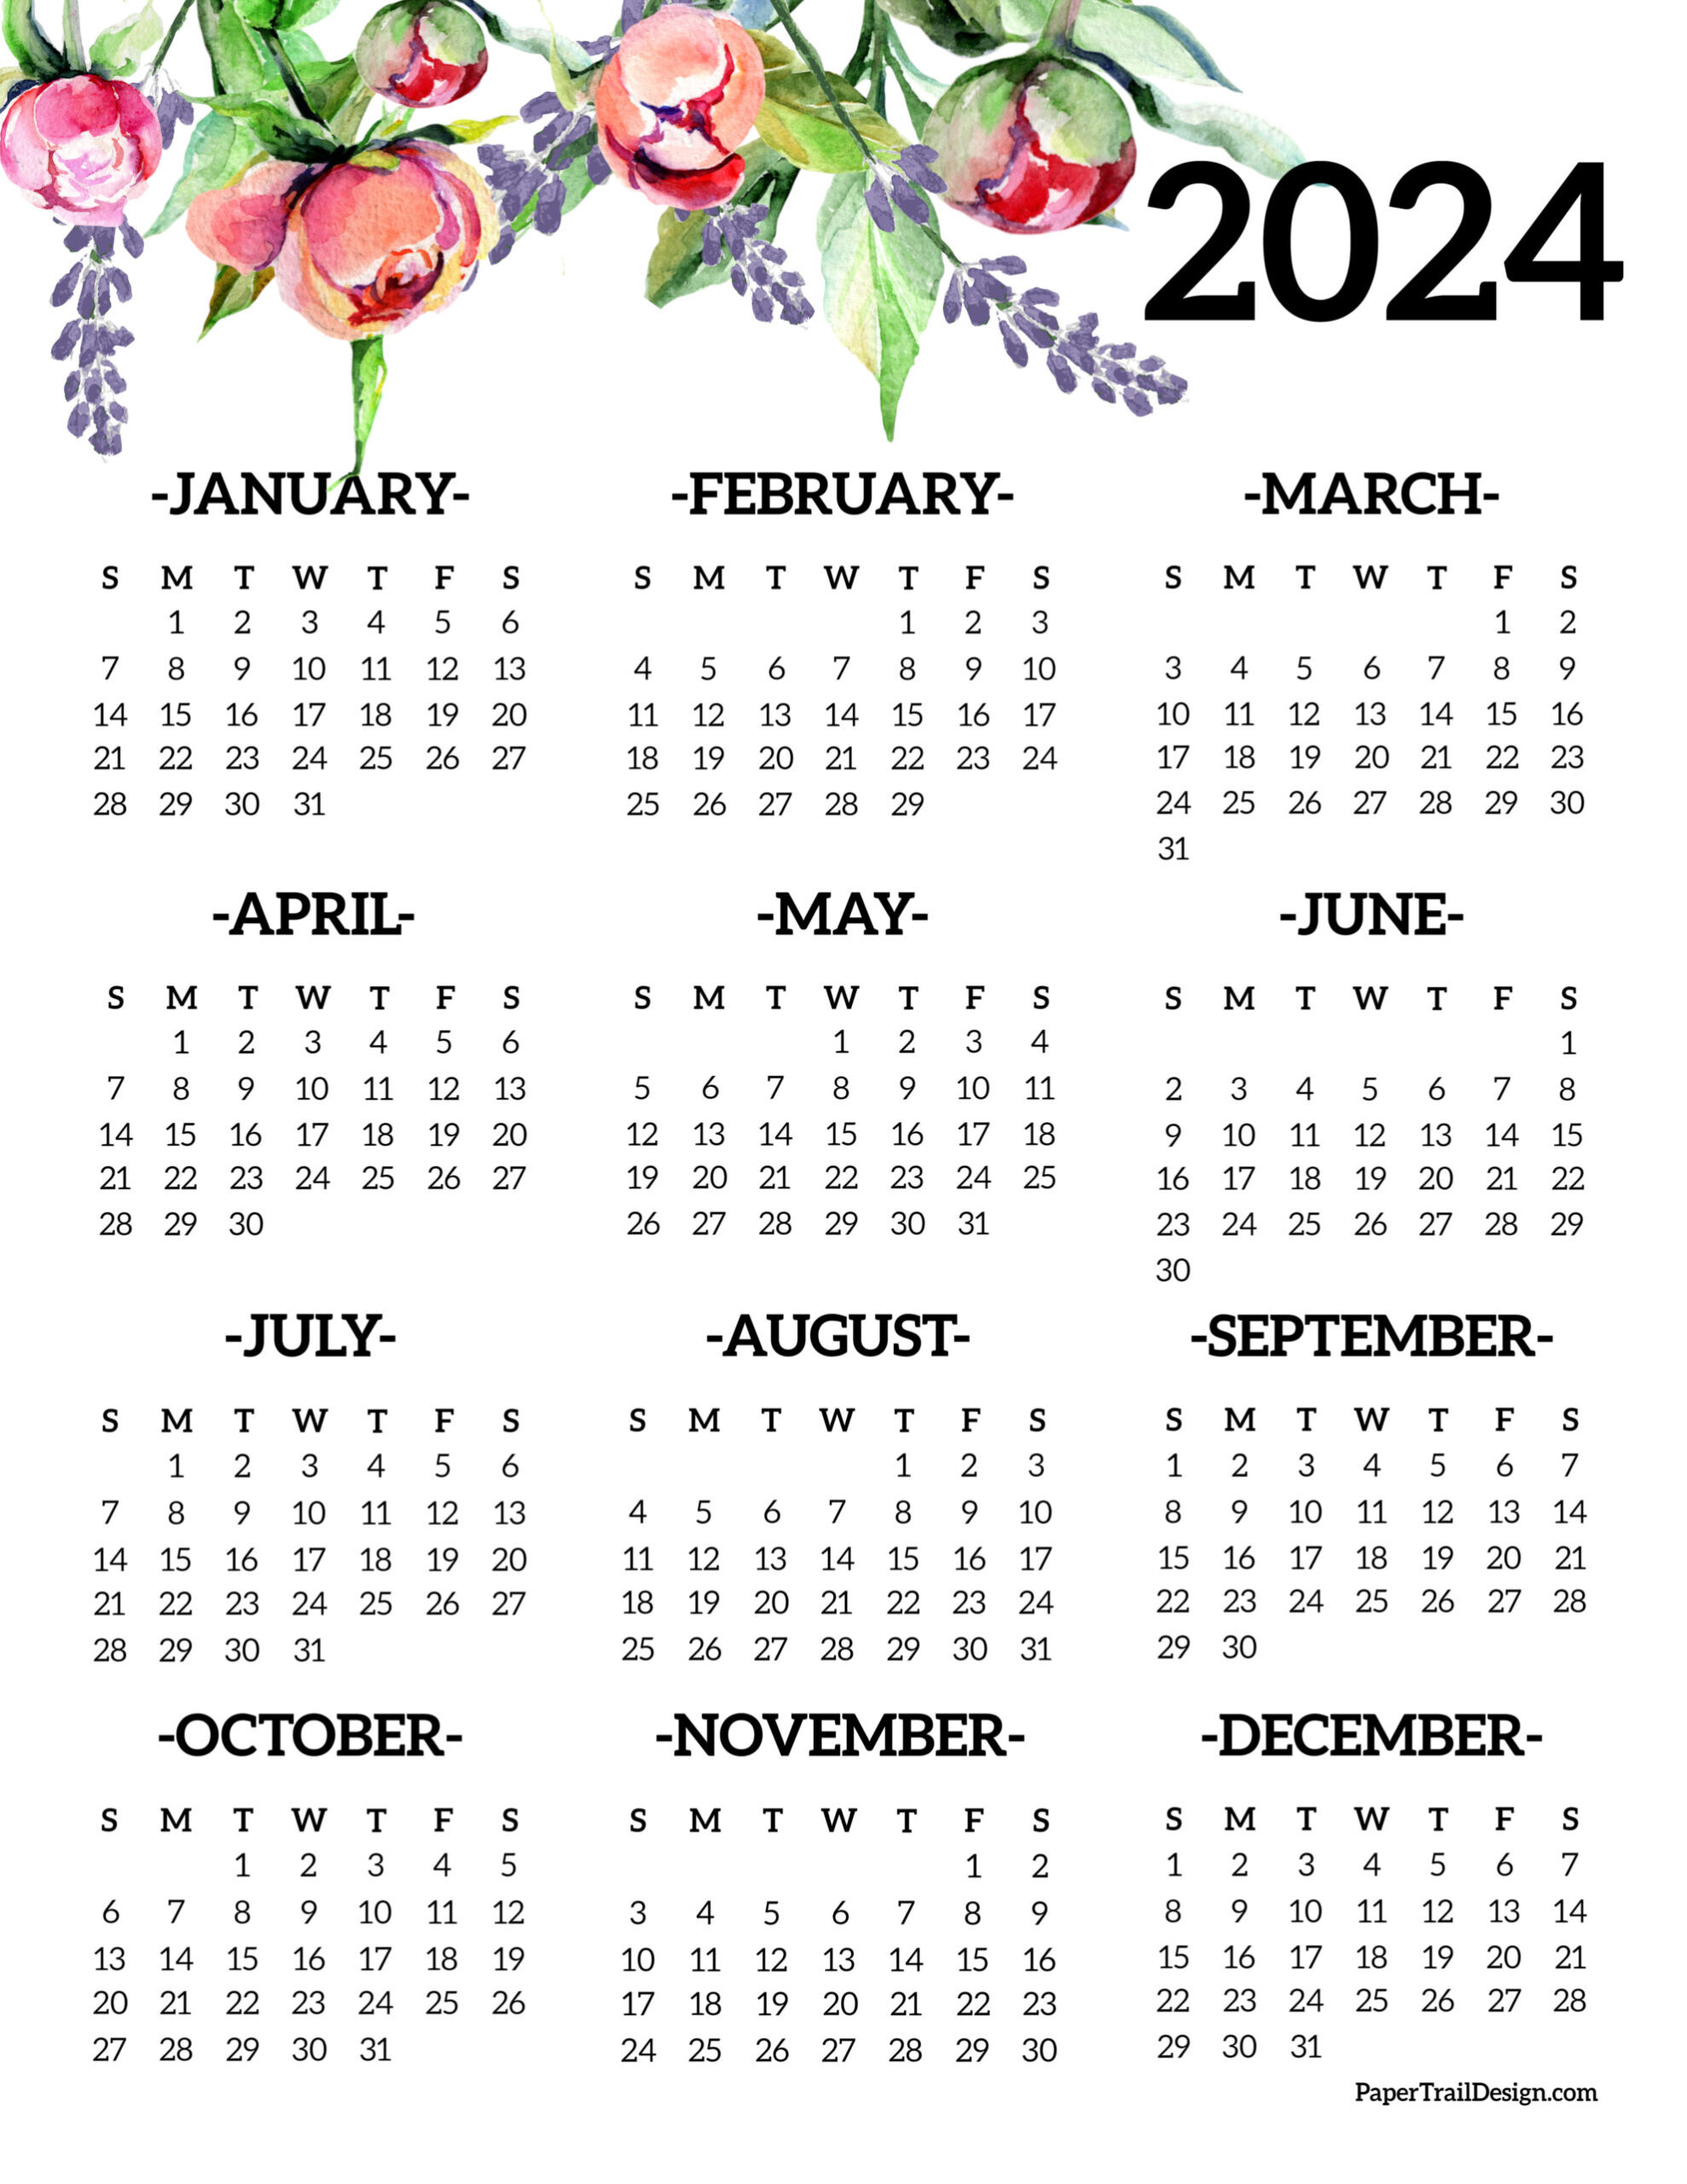 Calendar 2024 Printable One Page - Paper Trail Design for Printable One Year Calendar 2024